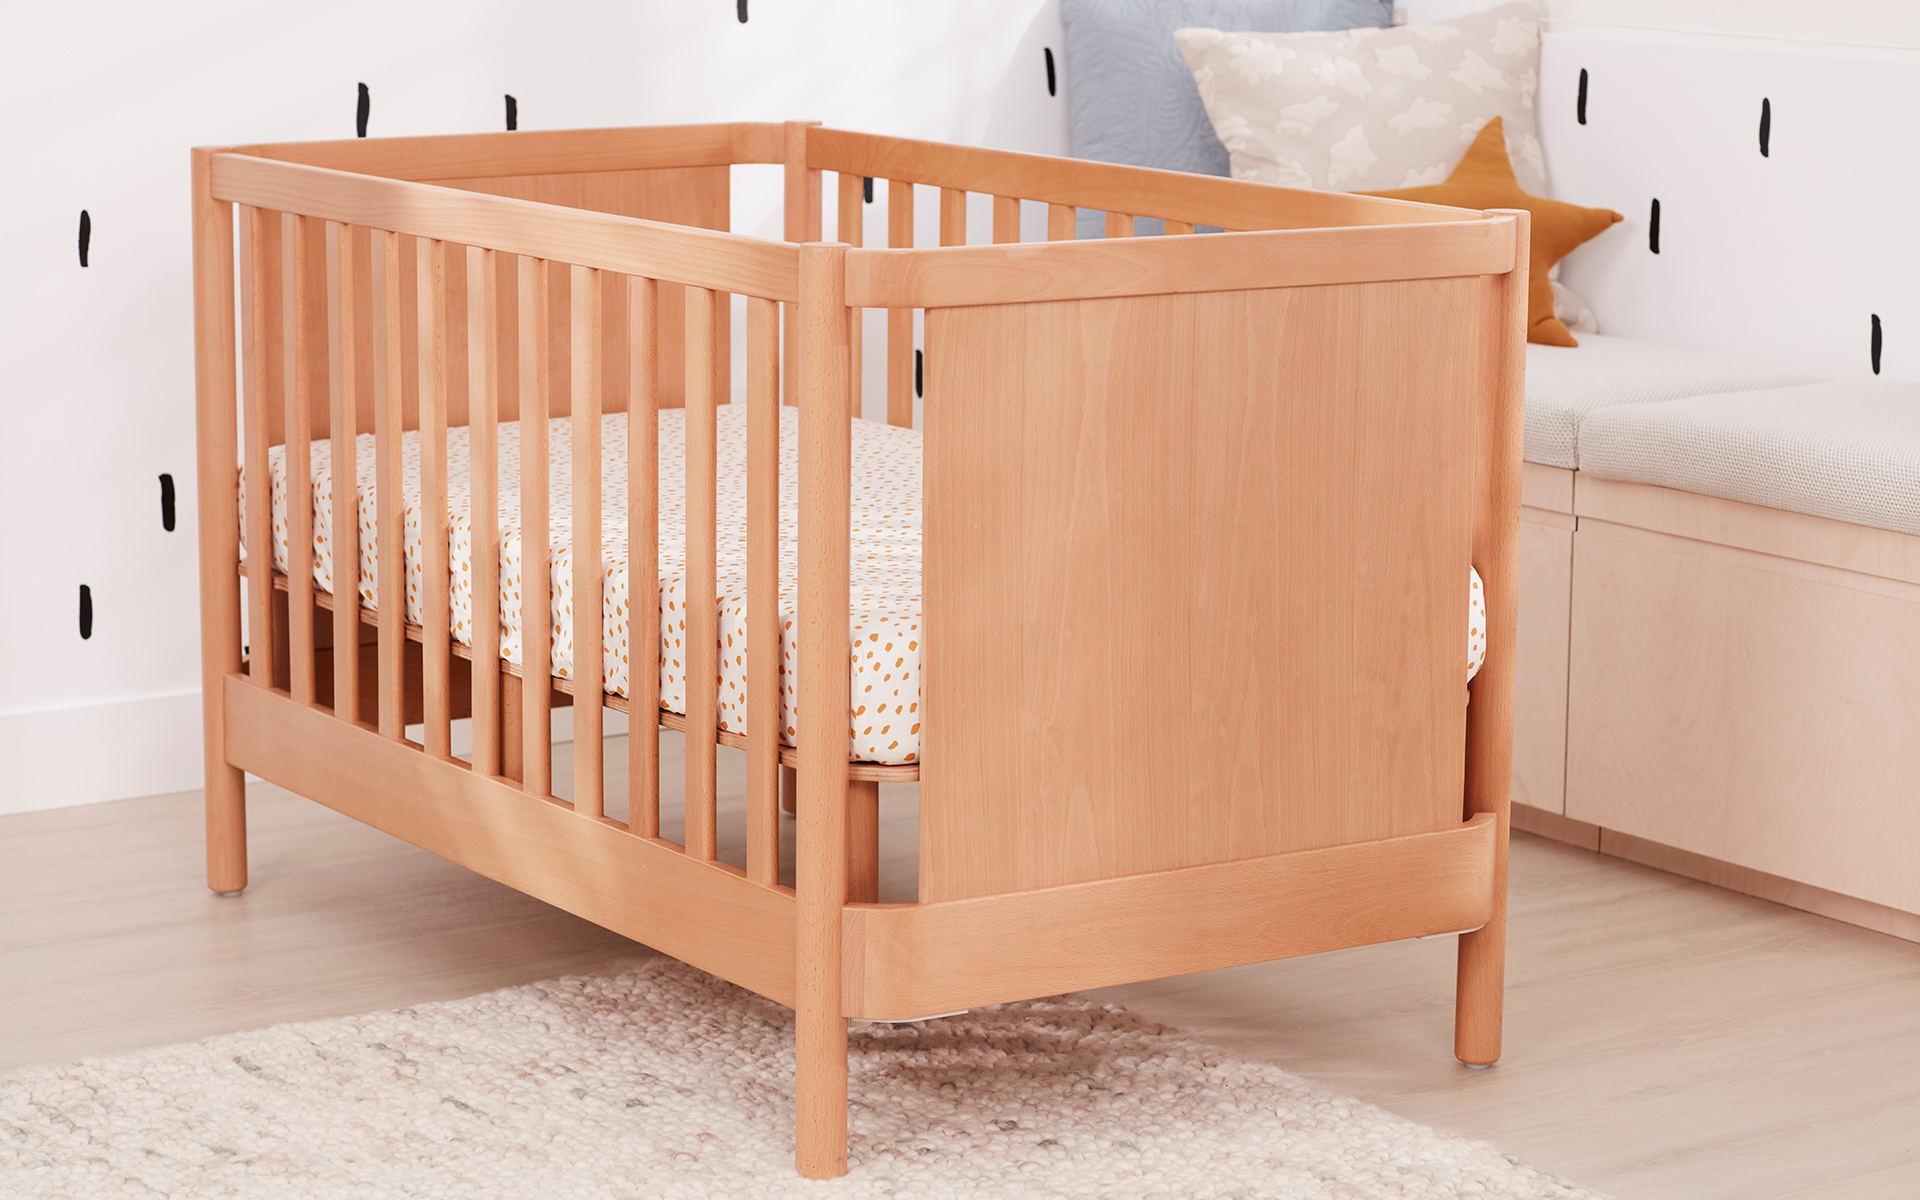 The Joey cot bed by Koala in a beautifully styled bedroom 